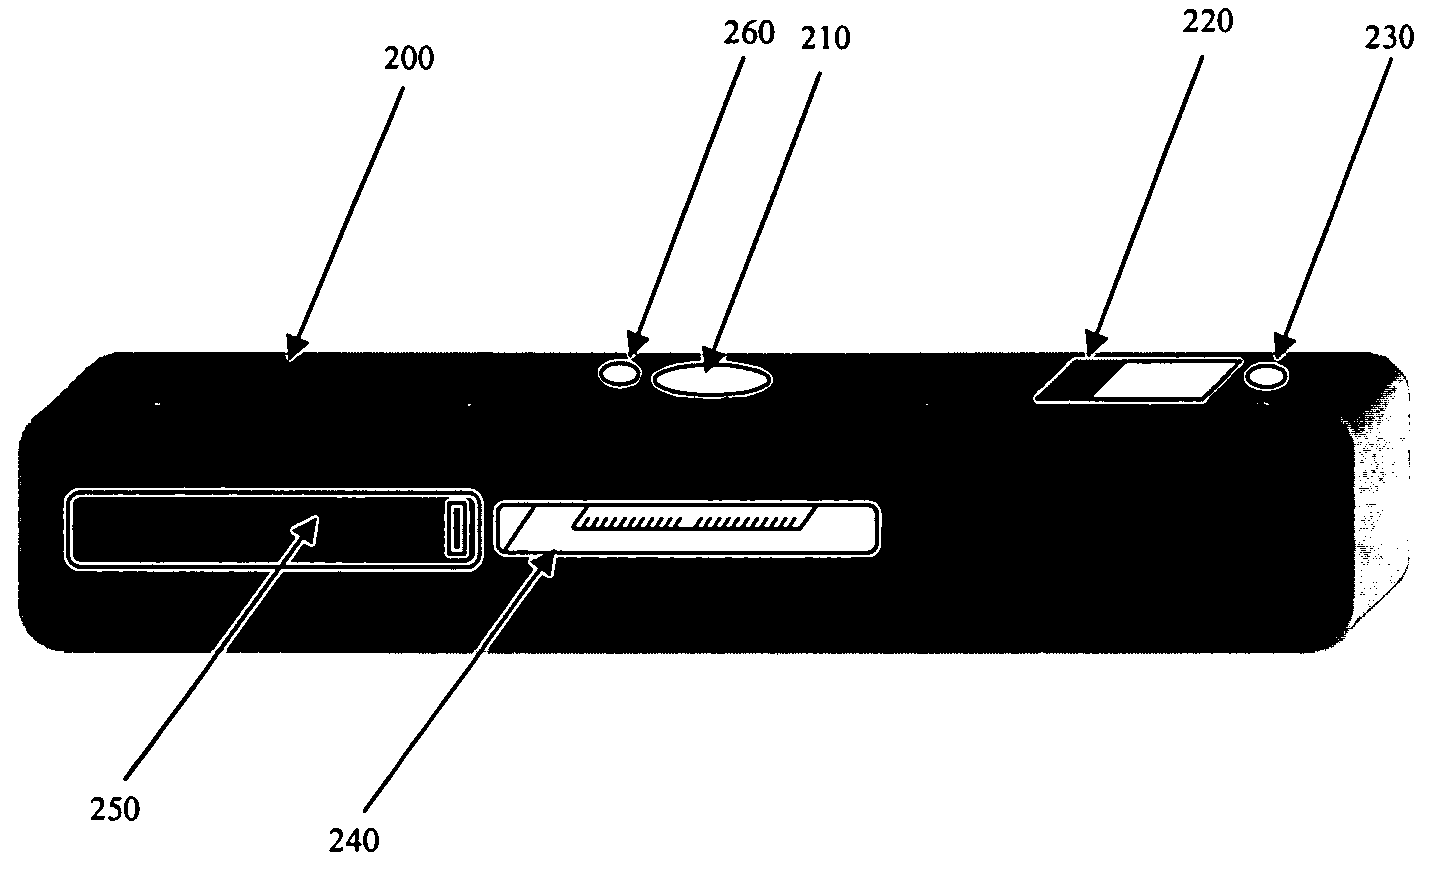 Portable media player emulator for facilitating wireless use of an accessory